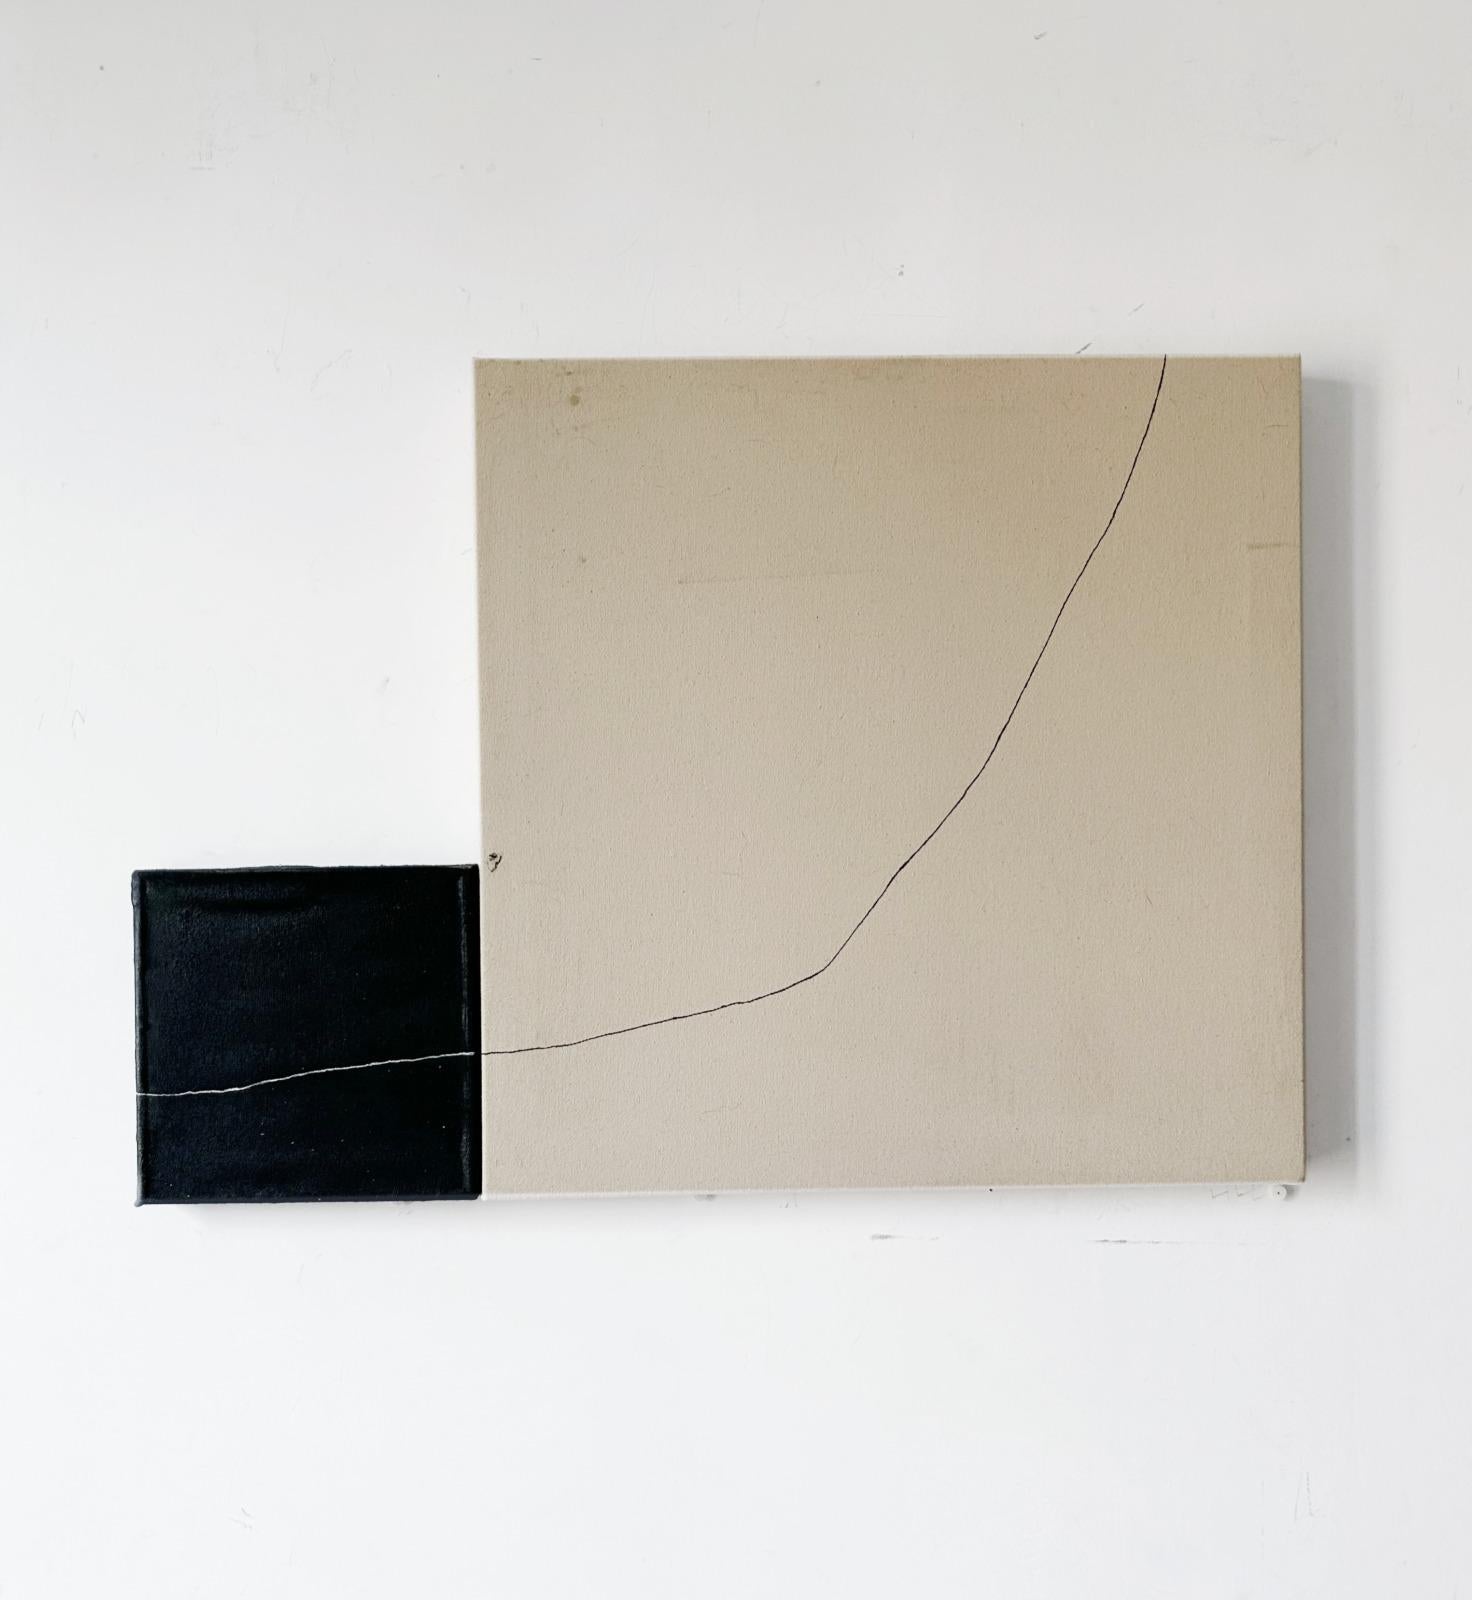 Diptych artwork by Alicia Gimeno, (Barcelona, 1989) Born into a family of engineers where the technical understanding of space was the norm, Gimeno kept her taste for abstraction and added a dose of play and creative freedom. His works —both visual